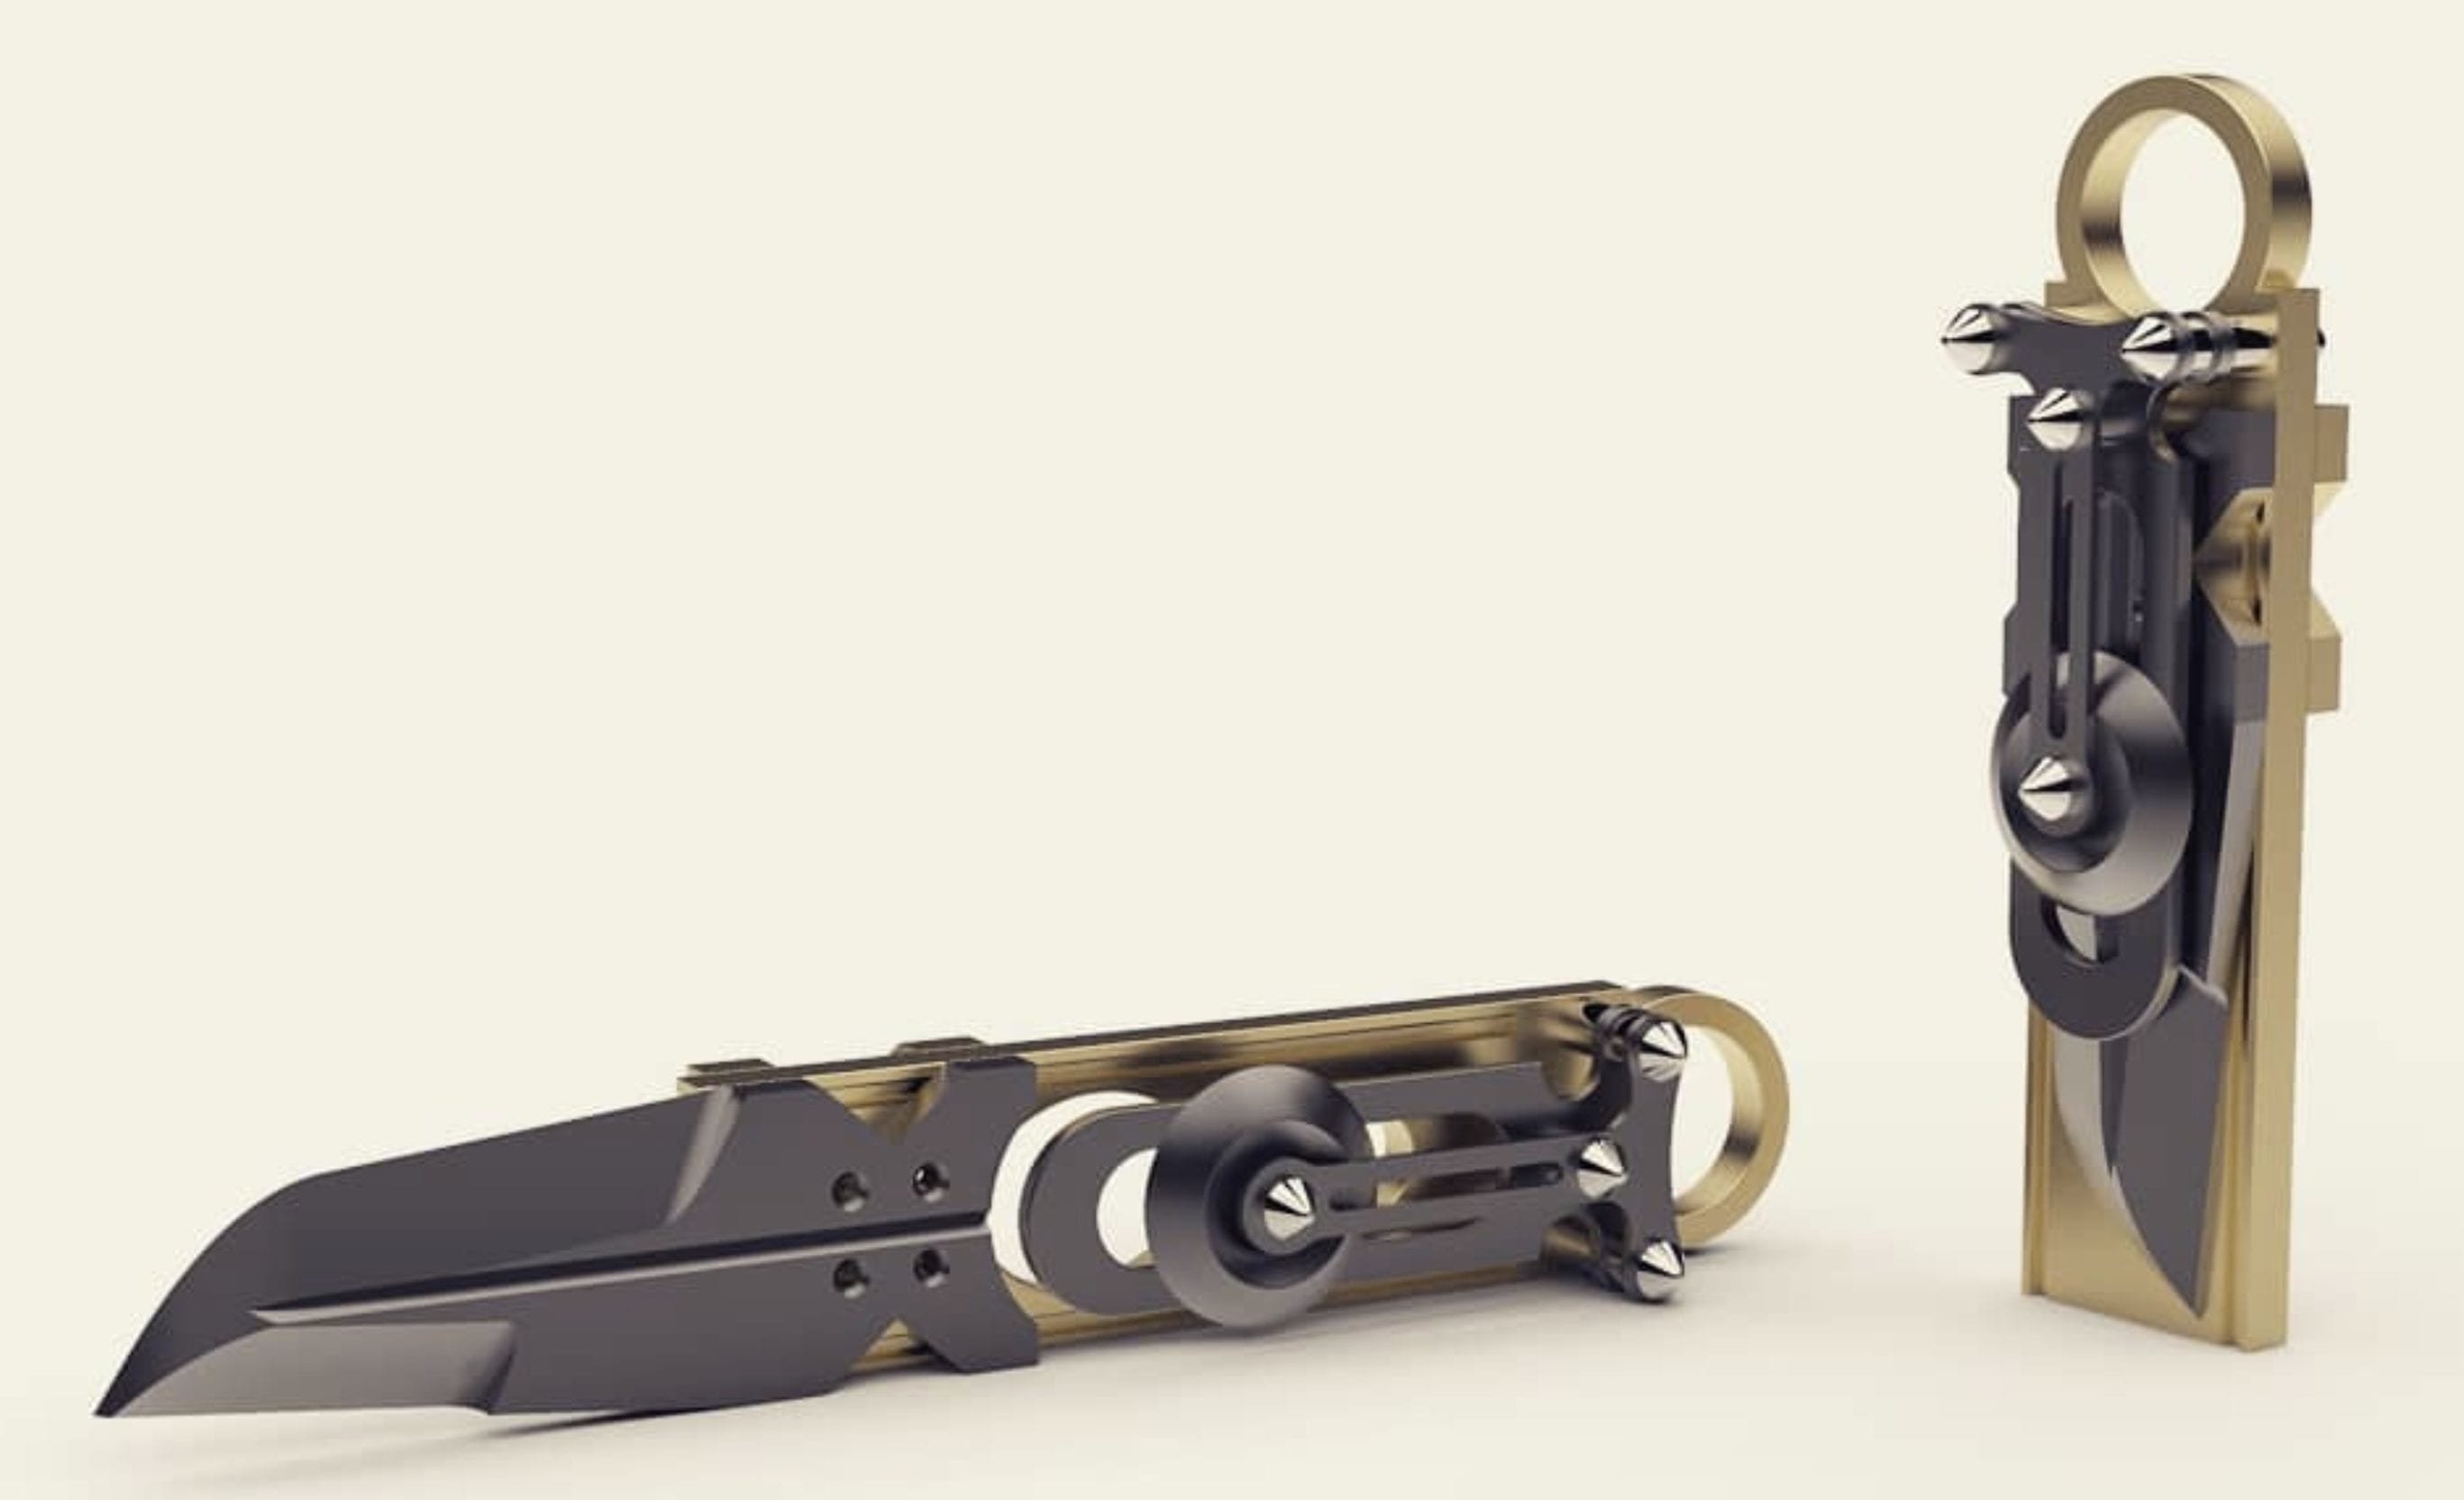 Need A Cyberpunk Knife In Your Life? RoboRazer's Inertix Exoblade Makes The Cut